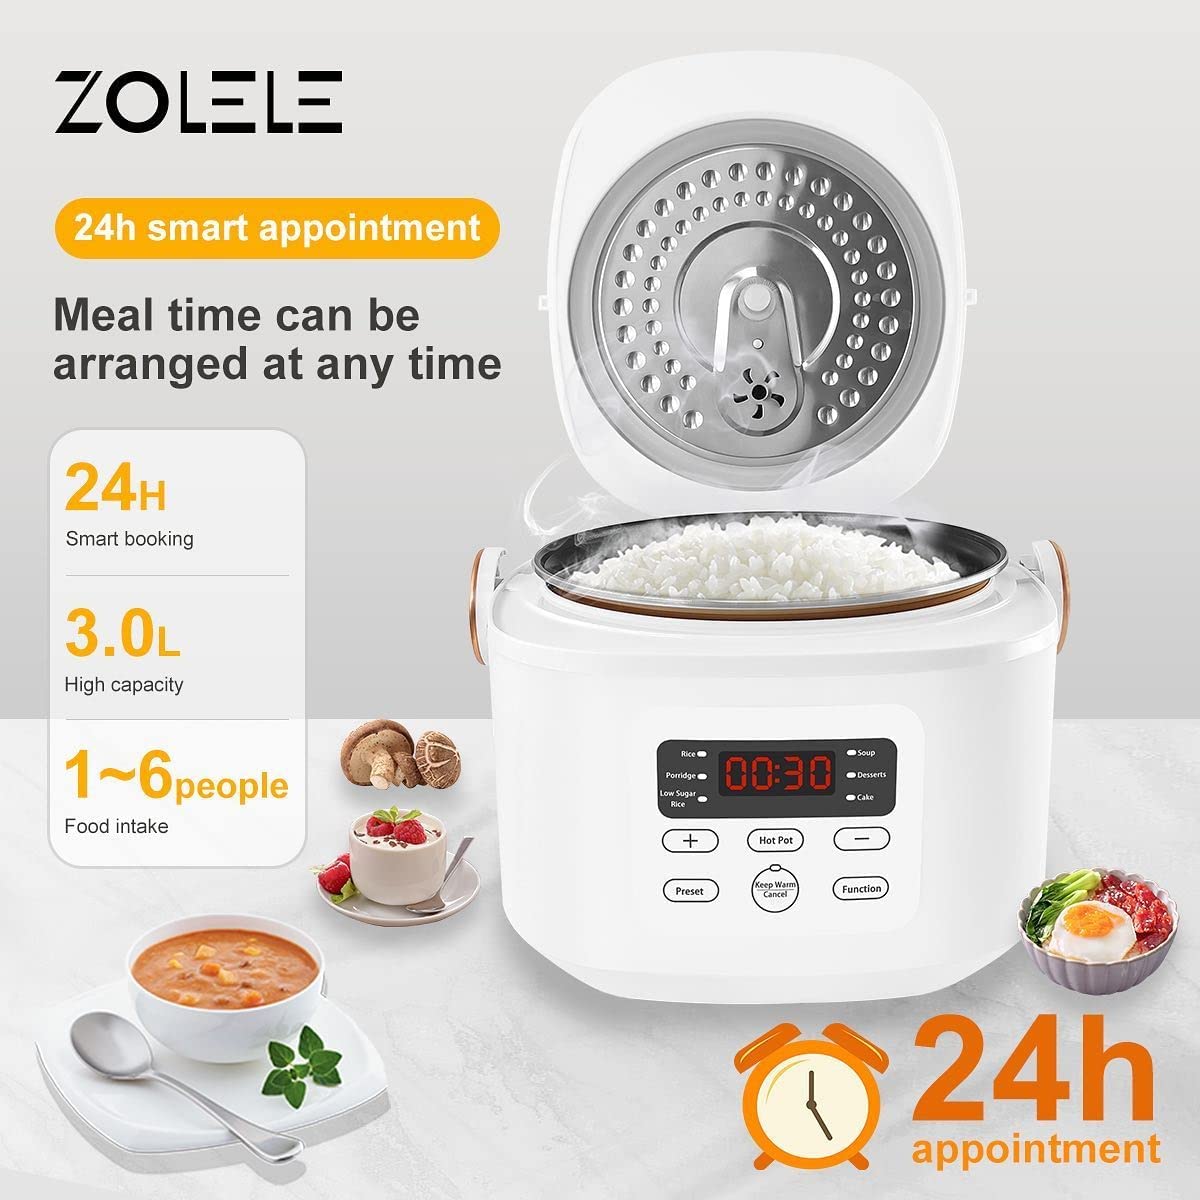 Zolele ZB500 Multifunctional Electric Rice Cooker With 3L Capacity Smart Low Sugar Rice Cooker 304 Stainless Steel Micro-Computer Button Double Inner Pot 700W Power - White